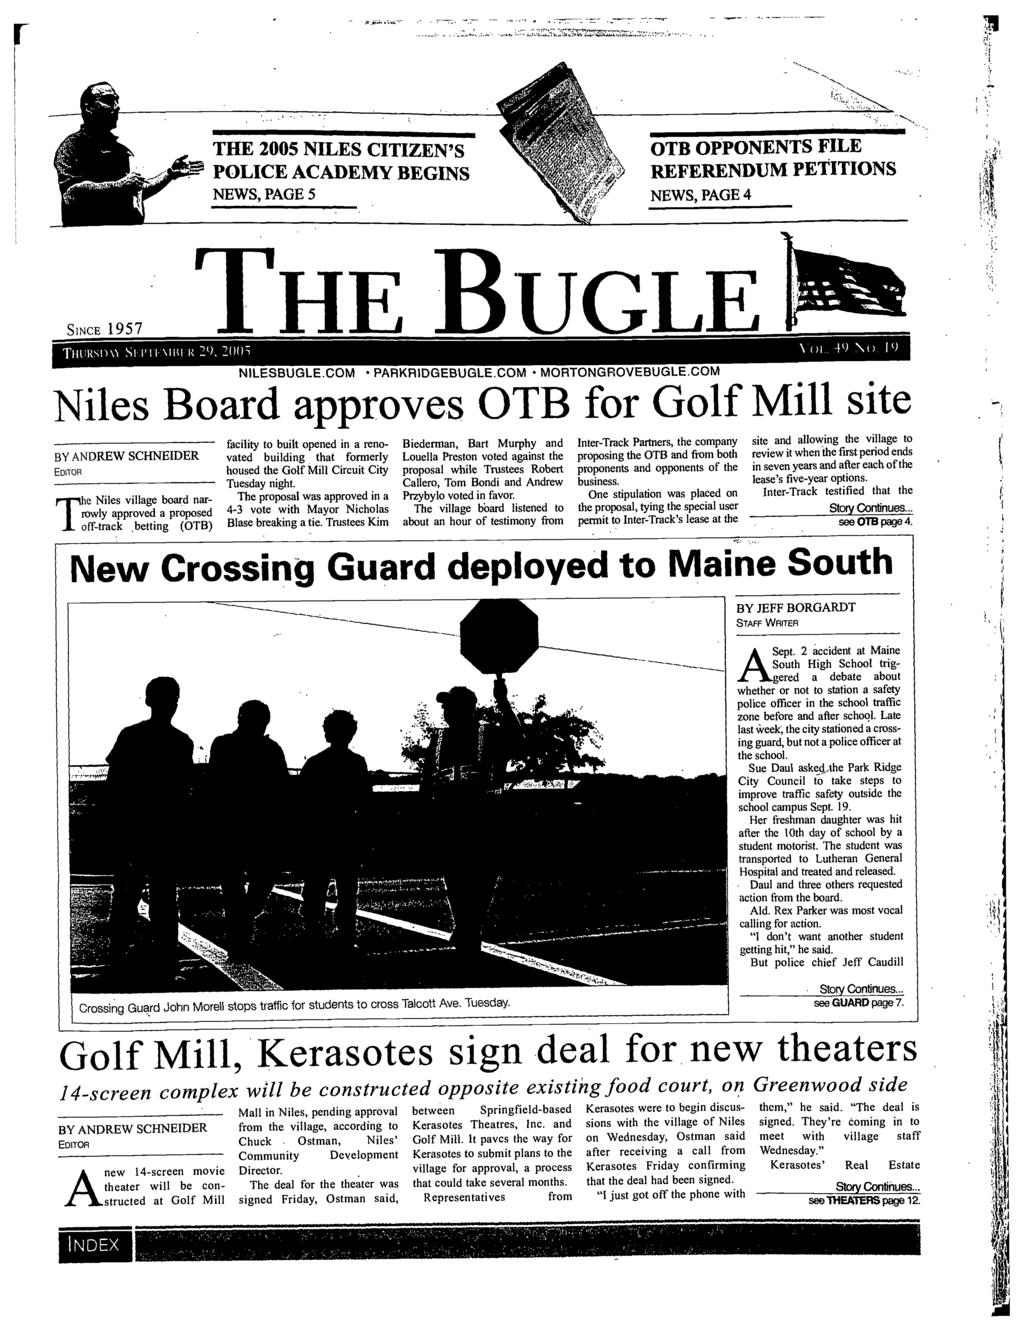 THE 2005 NILES CITIZENS POLICE ACADEMY BEGINS NEWS, PAGE 5 OTB OPPONENTS FILE REFERENDUM PEtITIONS NEWS, PAGE 4 SINCE 1957 BY ANDREW SCHNEIDER EDITOR The BY ANDREW SCHNEIDER EDITOR Nues village board